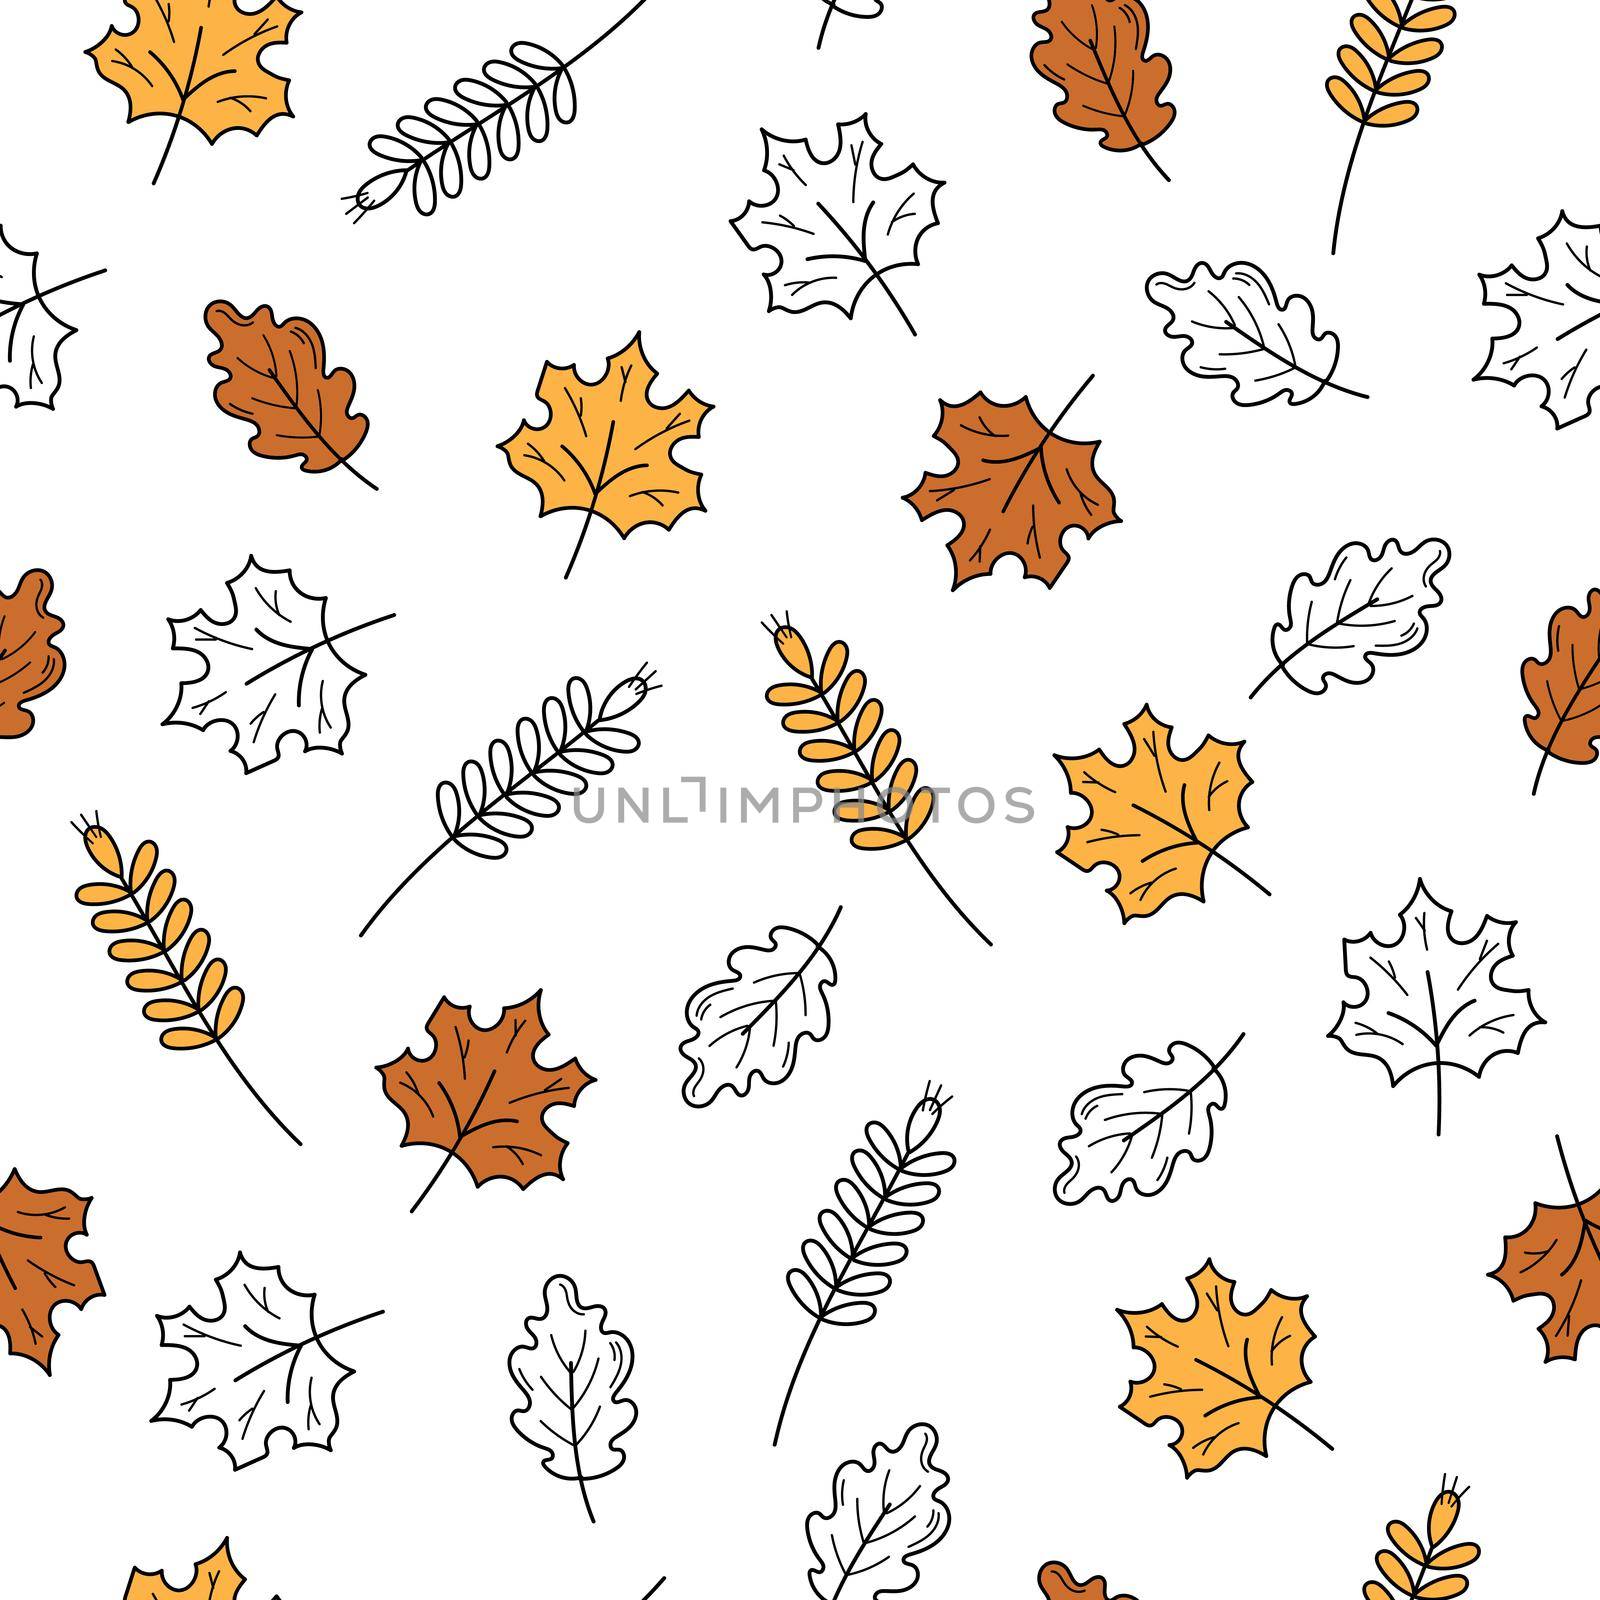 Colored and black and white icons of leaves hand drawn - seamless texture by natali_brill